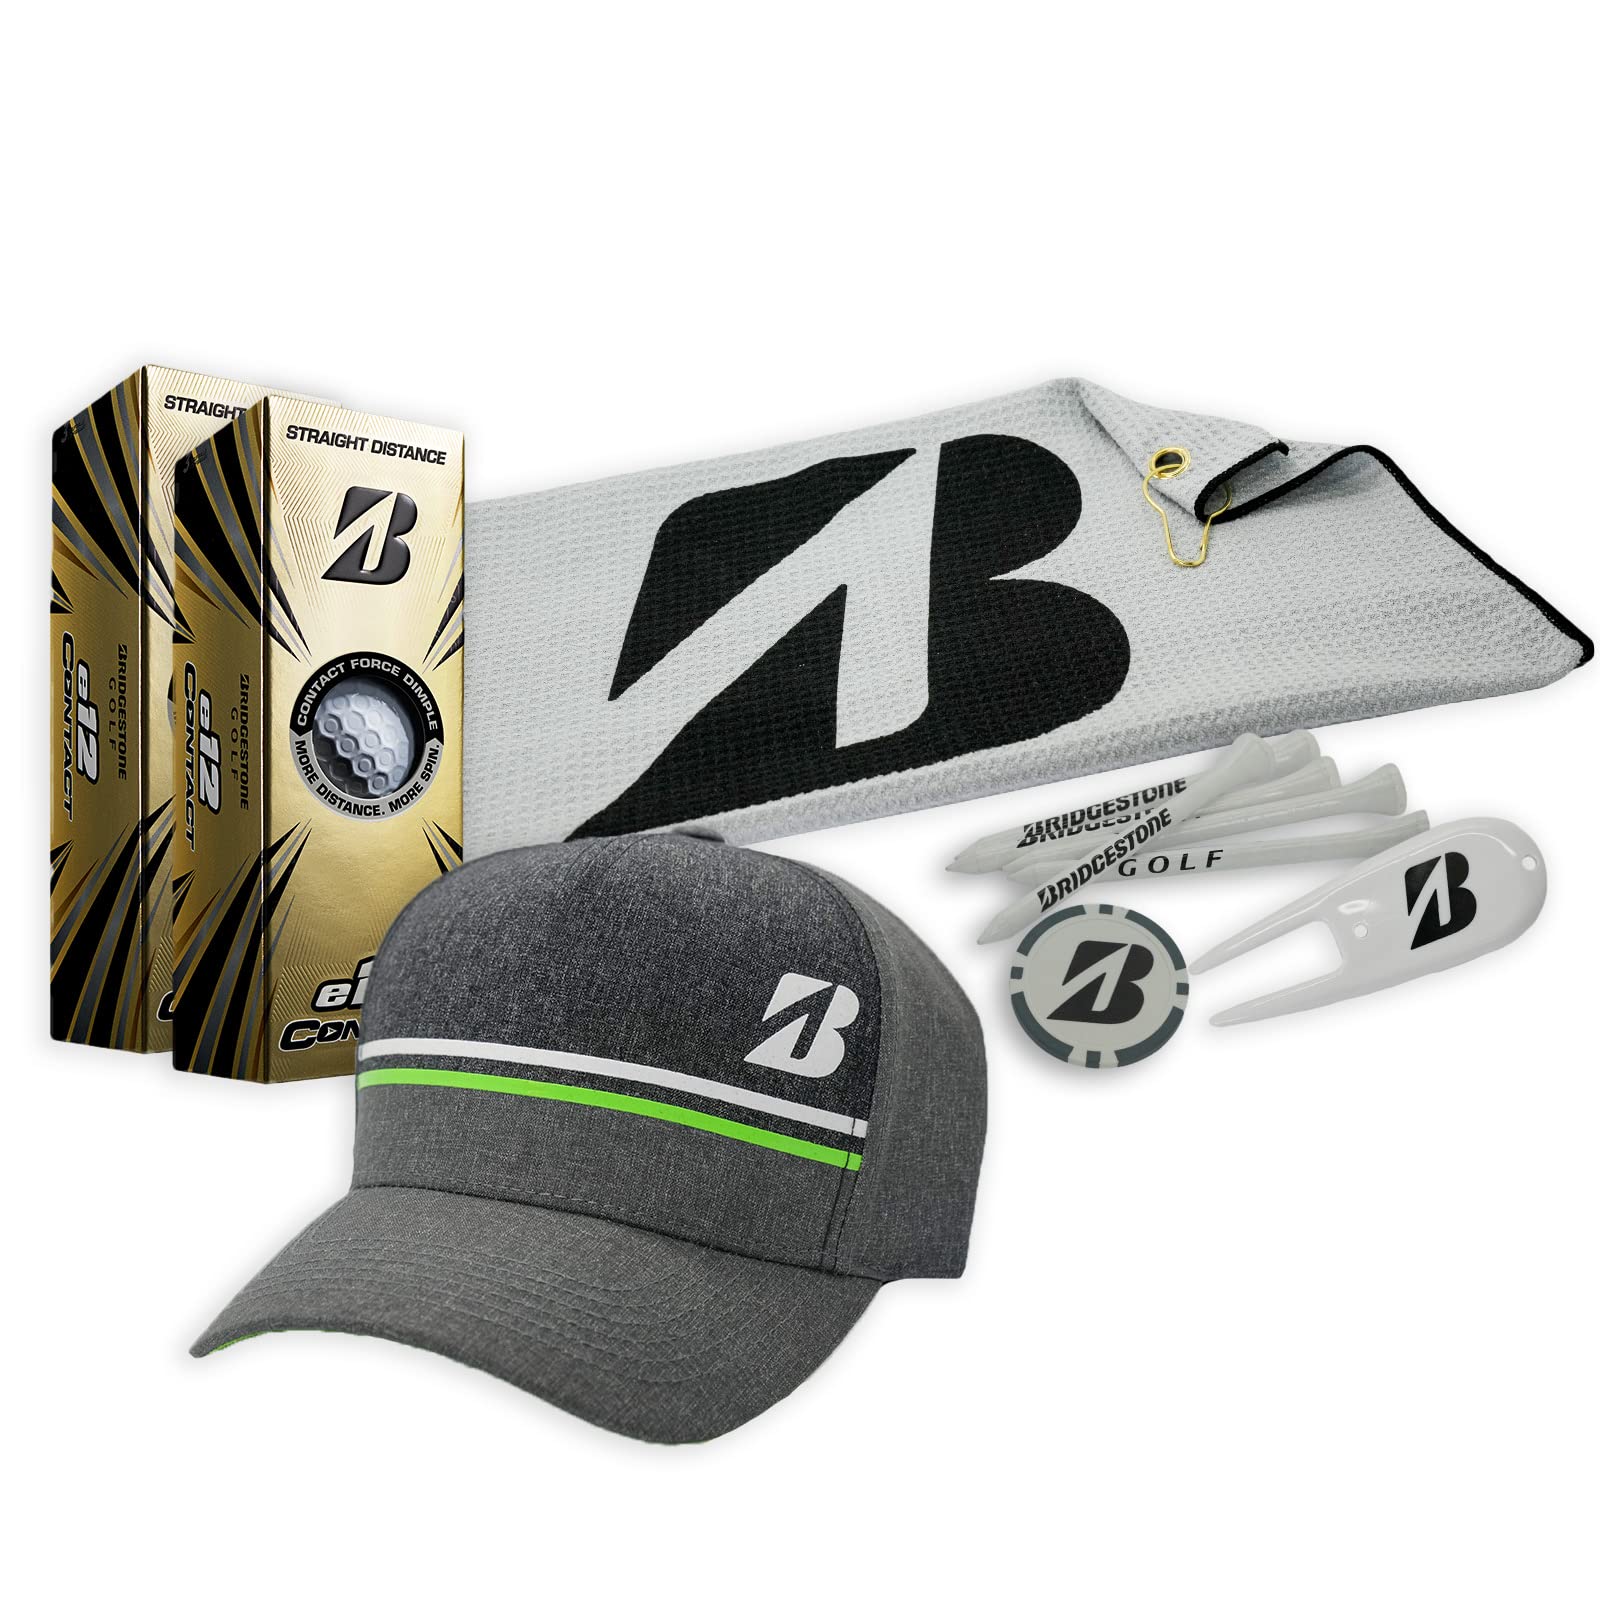 Bridgestone e12 Contact Golf Balls & Accessories Gift Sets: 30-Oz Stainless Steel Tumbler Set $16.10, Conquer Adjustable Hat Set $21.60 + Free Shipping w/ Prime or on $25+